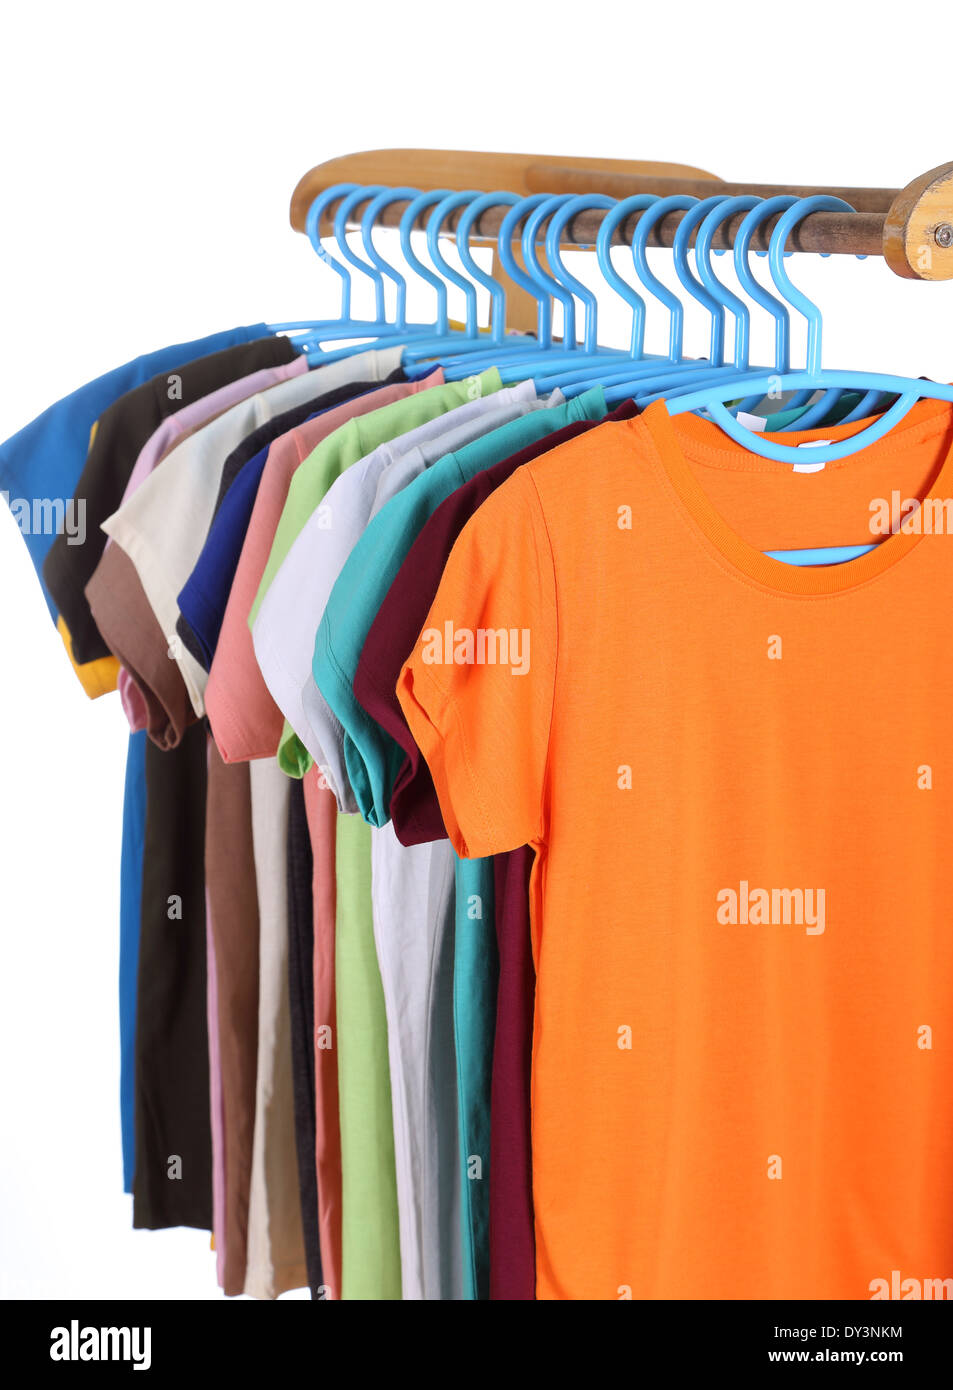 T shirts on hangers hi-res stock images - Alamy